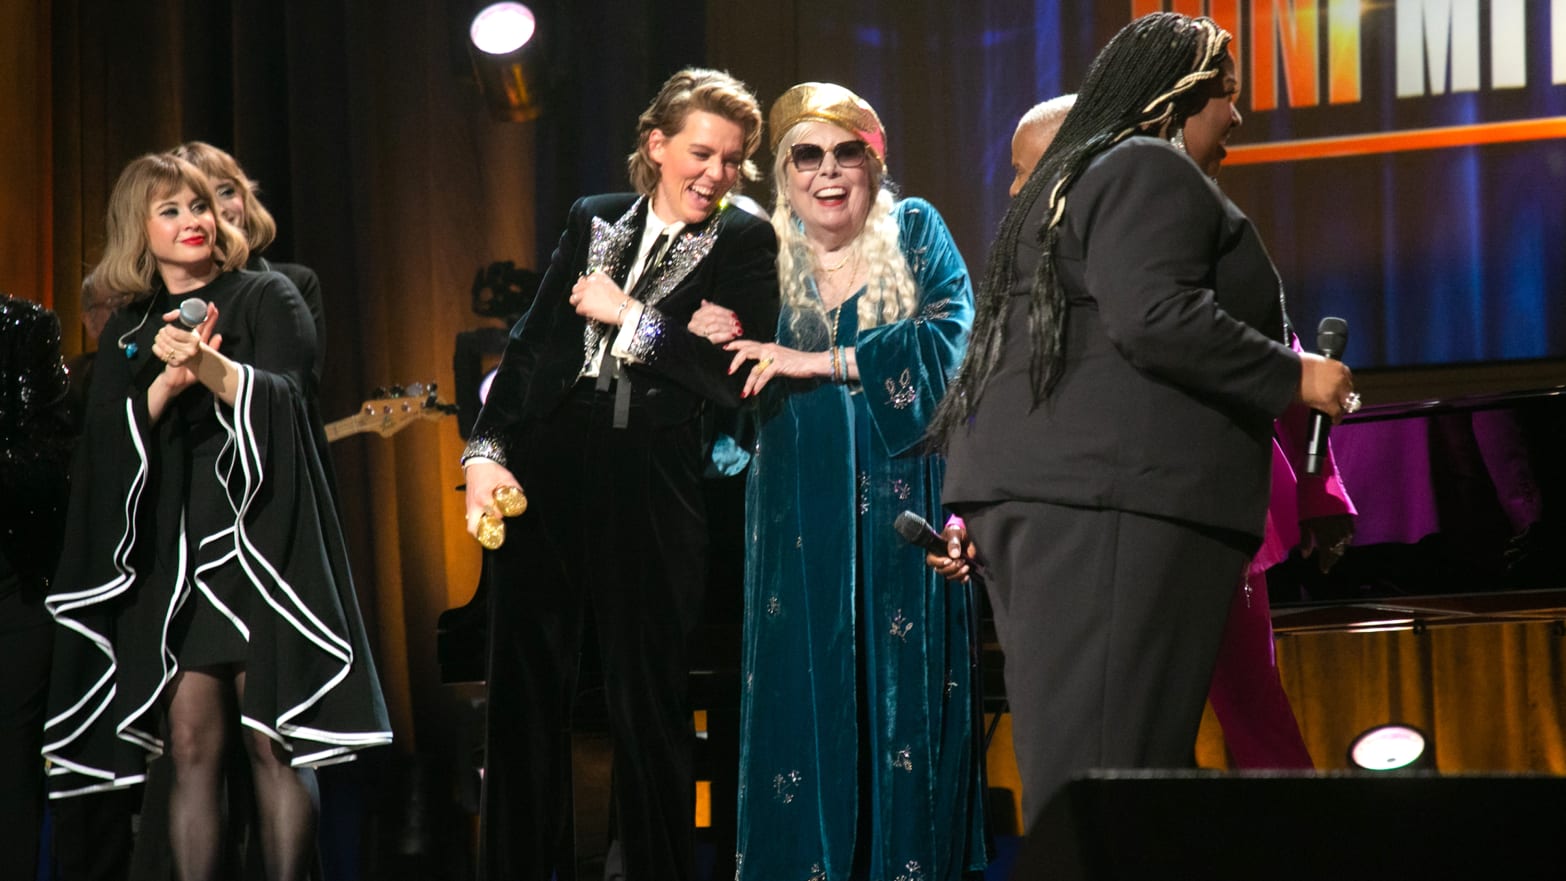 Watch Joni Mitchell Sing ‘The Circle Game’ for PBS Gershwin Prize Concert